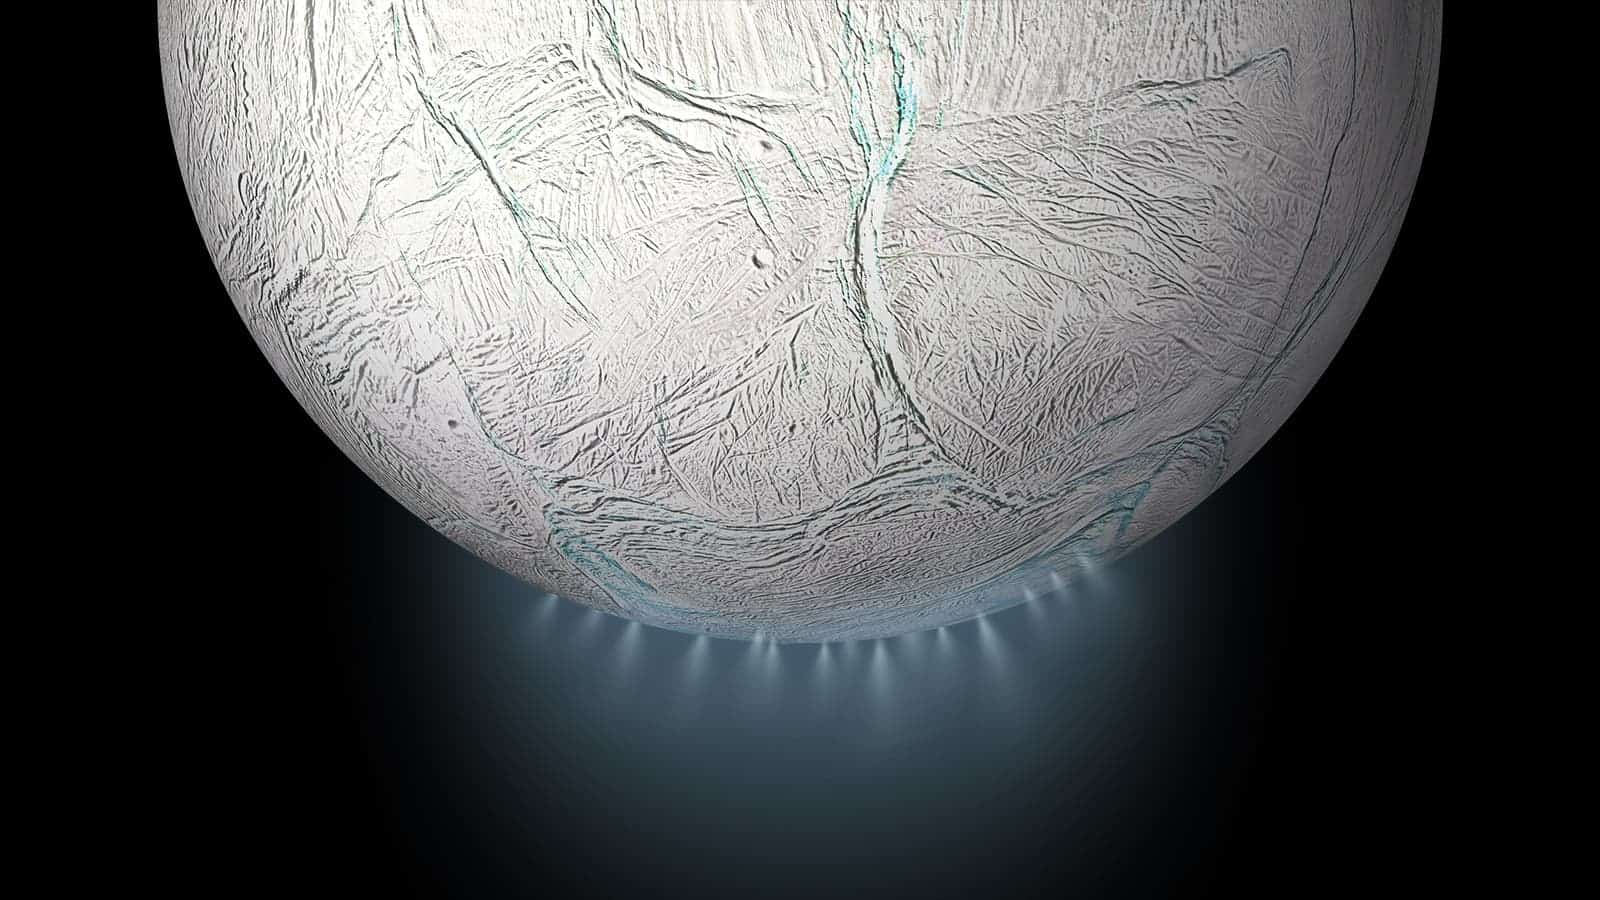 Artist impression of plumes gushing out of Enceladus' south pole. Credit: NASA.